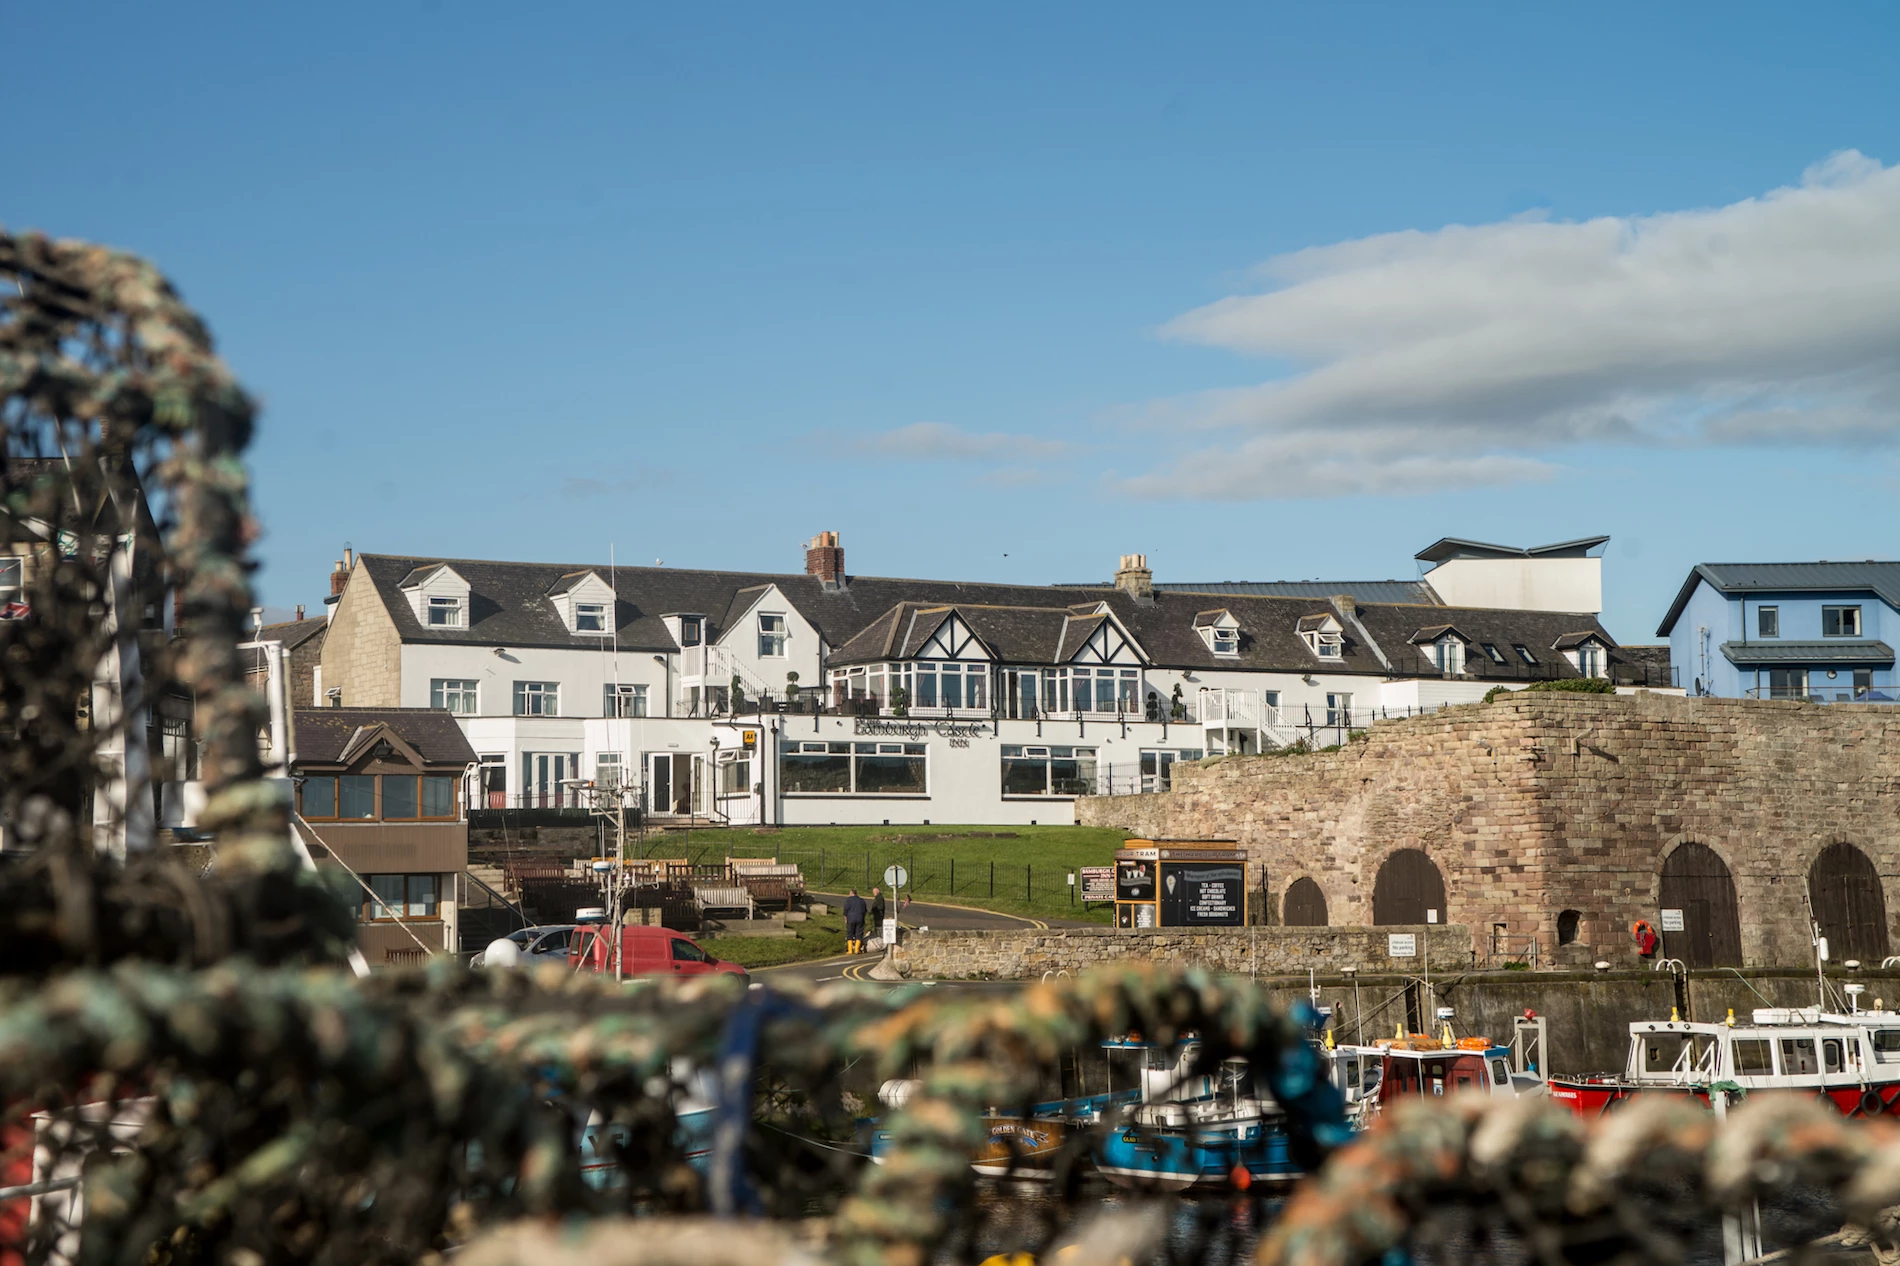 The Bamburgh Castle Inn, The Inn Collection Group’s flagship pub with rooms unit in Seahouses, Northumberland.